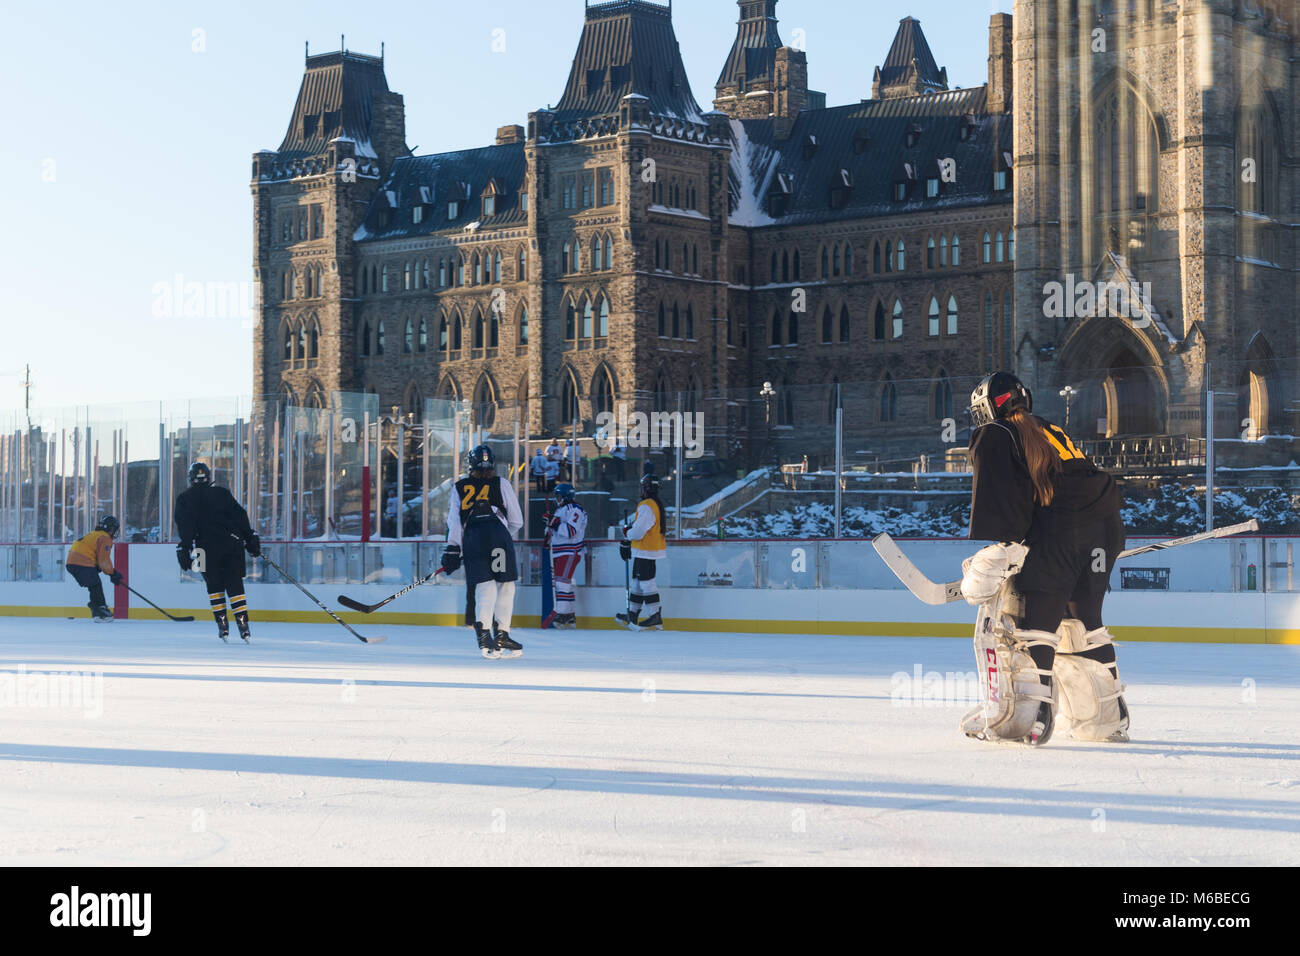 Ottawa, ON / Canada - December 16 2017: Girls playing hockey at the temporary ice rink at Parliament Hill Stock Photo